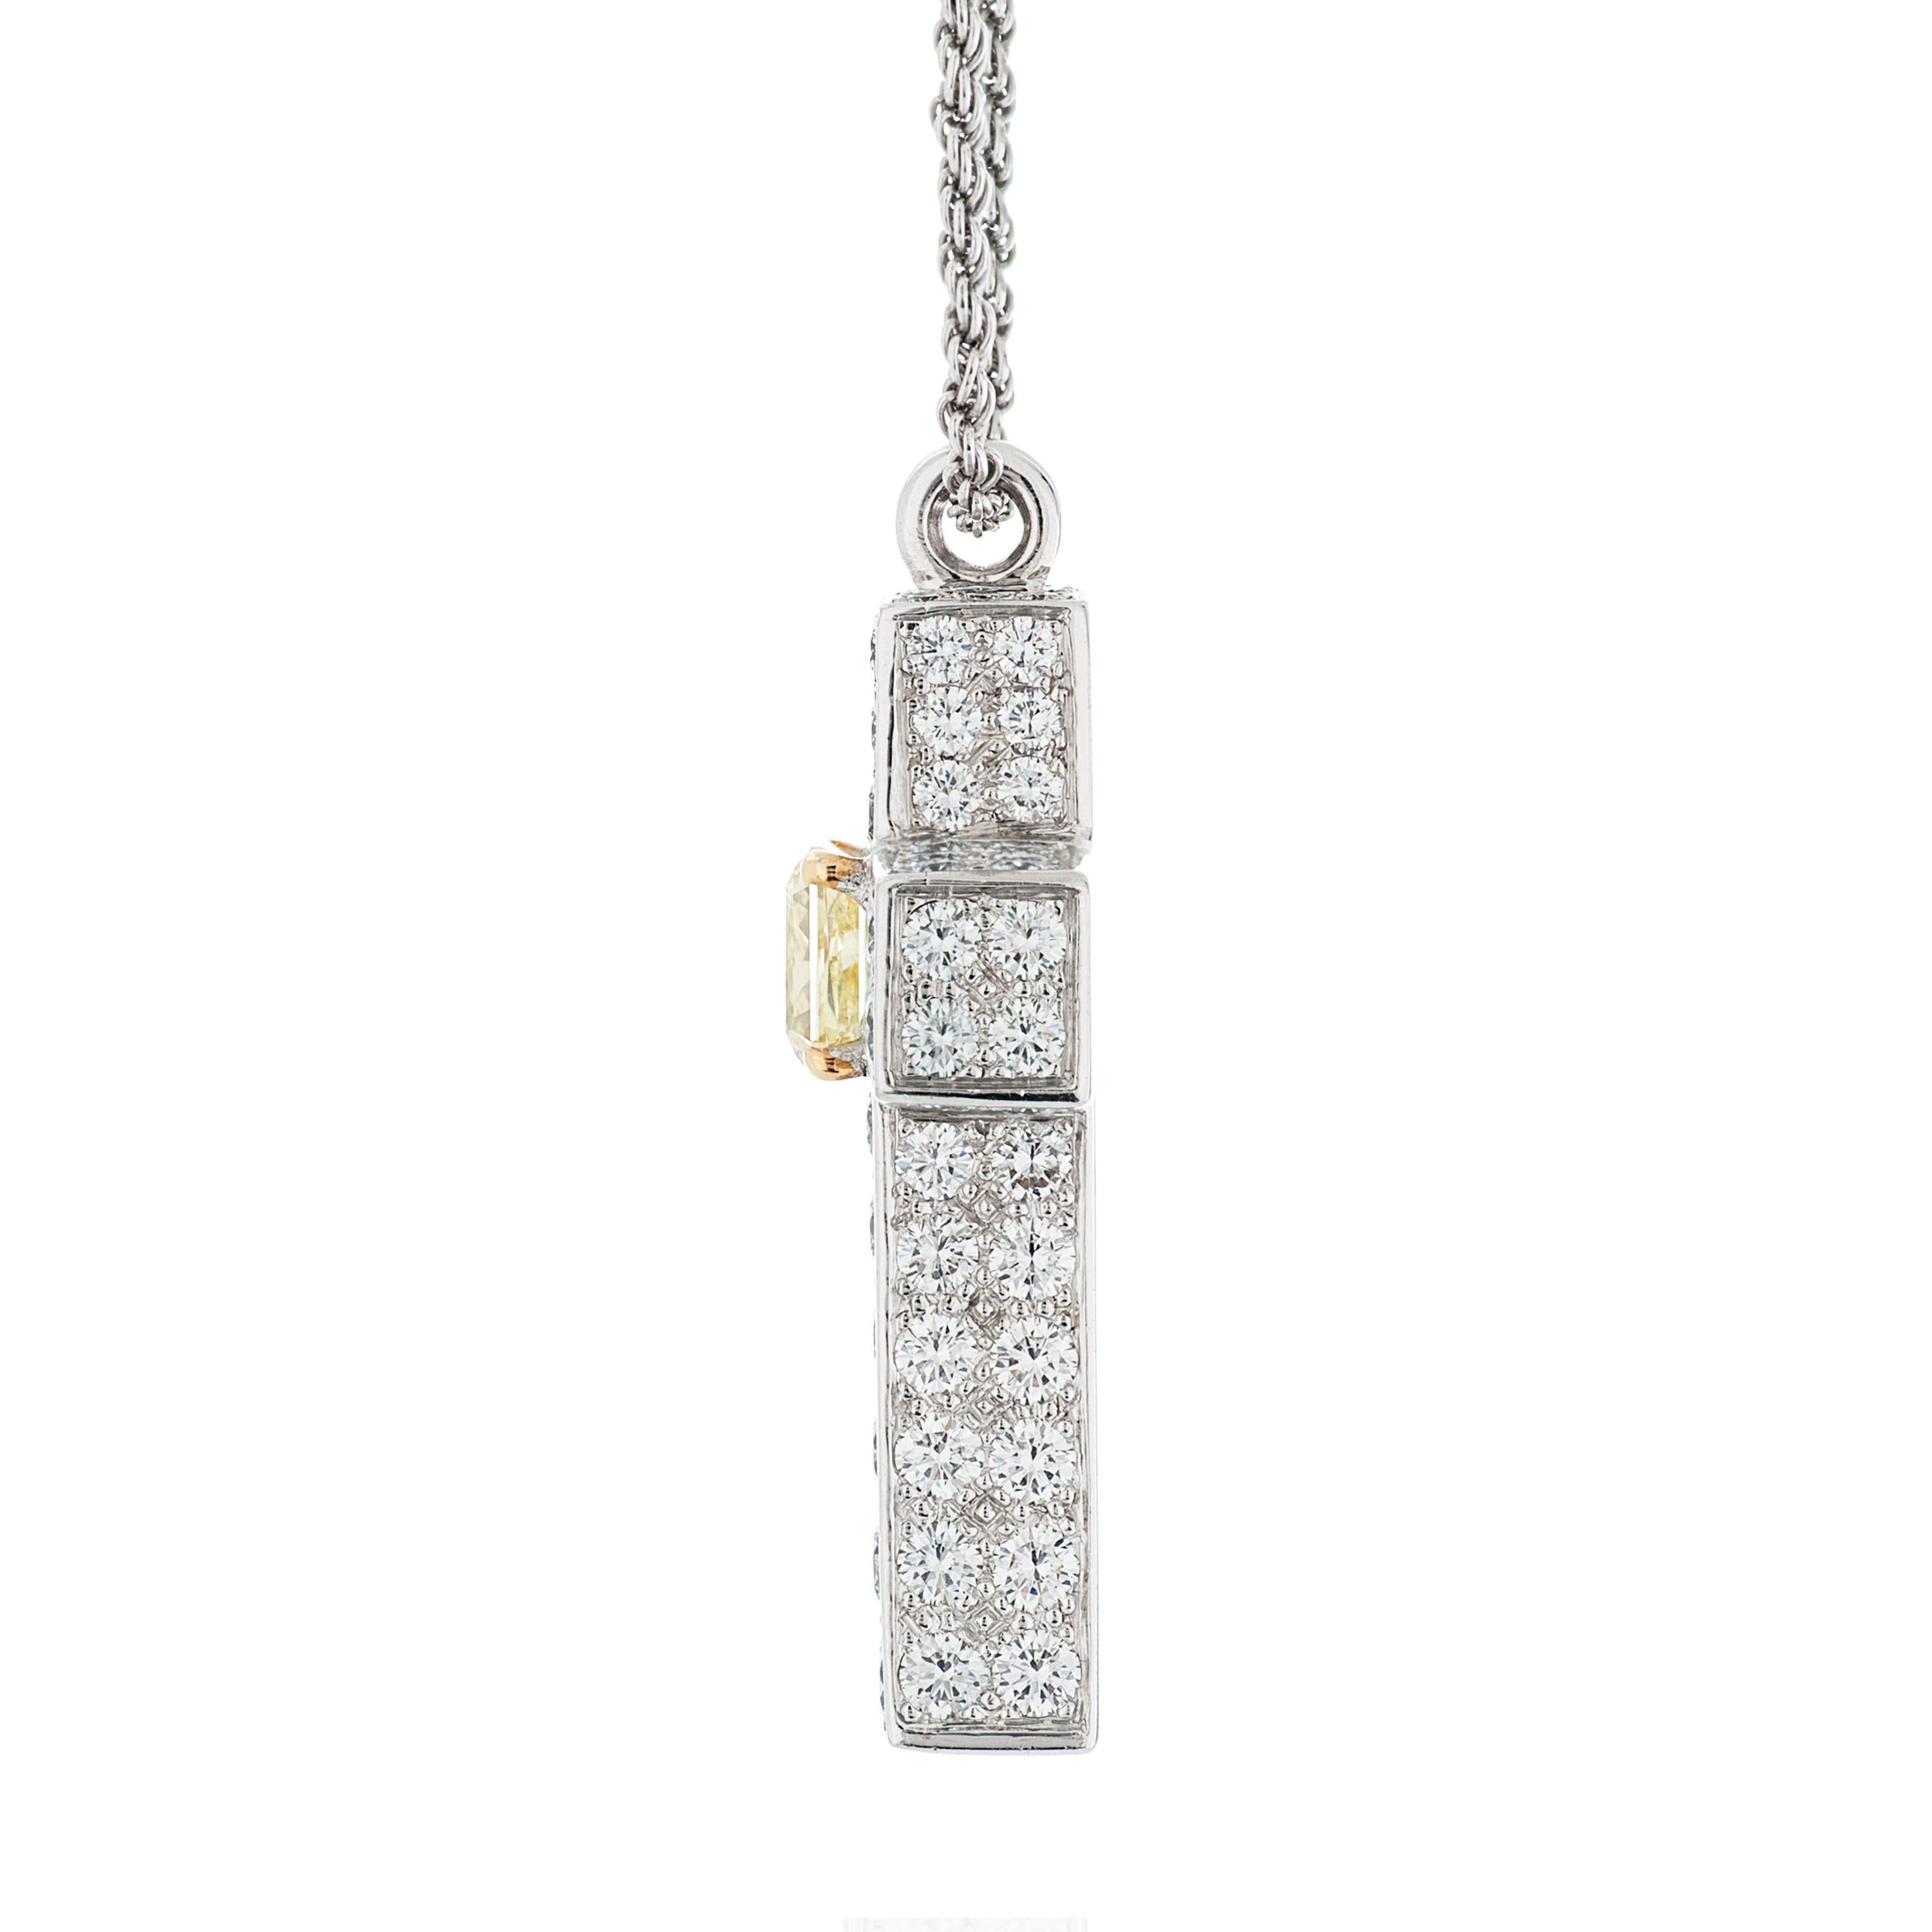 Graff white and fancy yellow diamond cross pendant necklace in 18 karat white gold.

This Graff cross features a 1.50 carat fancy yellow radiant cut diamond with VS1 clarity, accompanied by a GIA report.  An additional 112 round brilliant cut